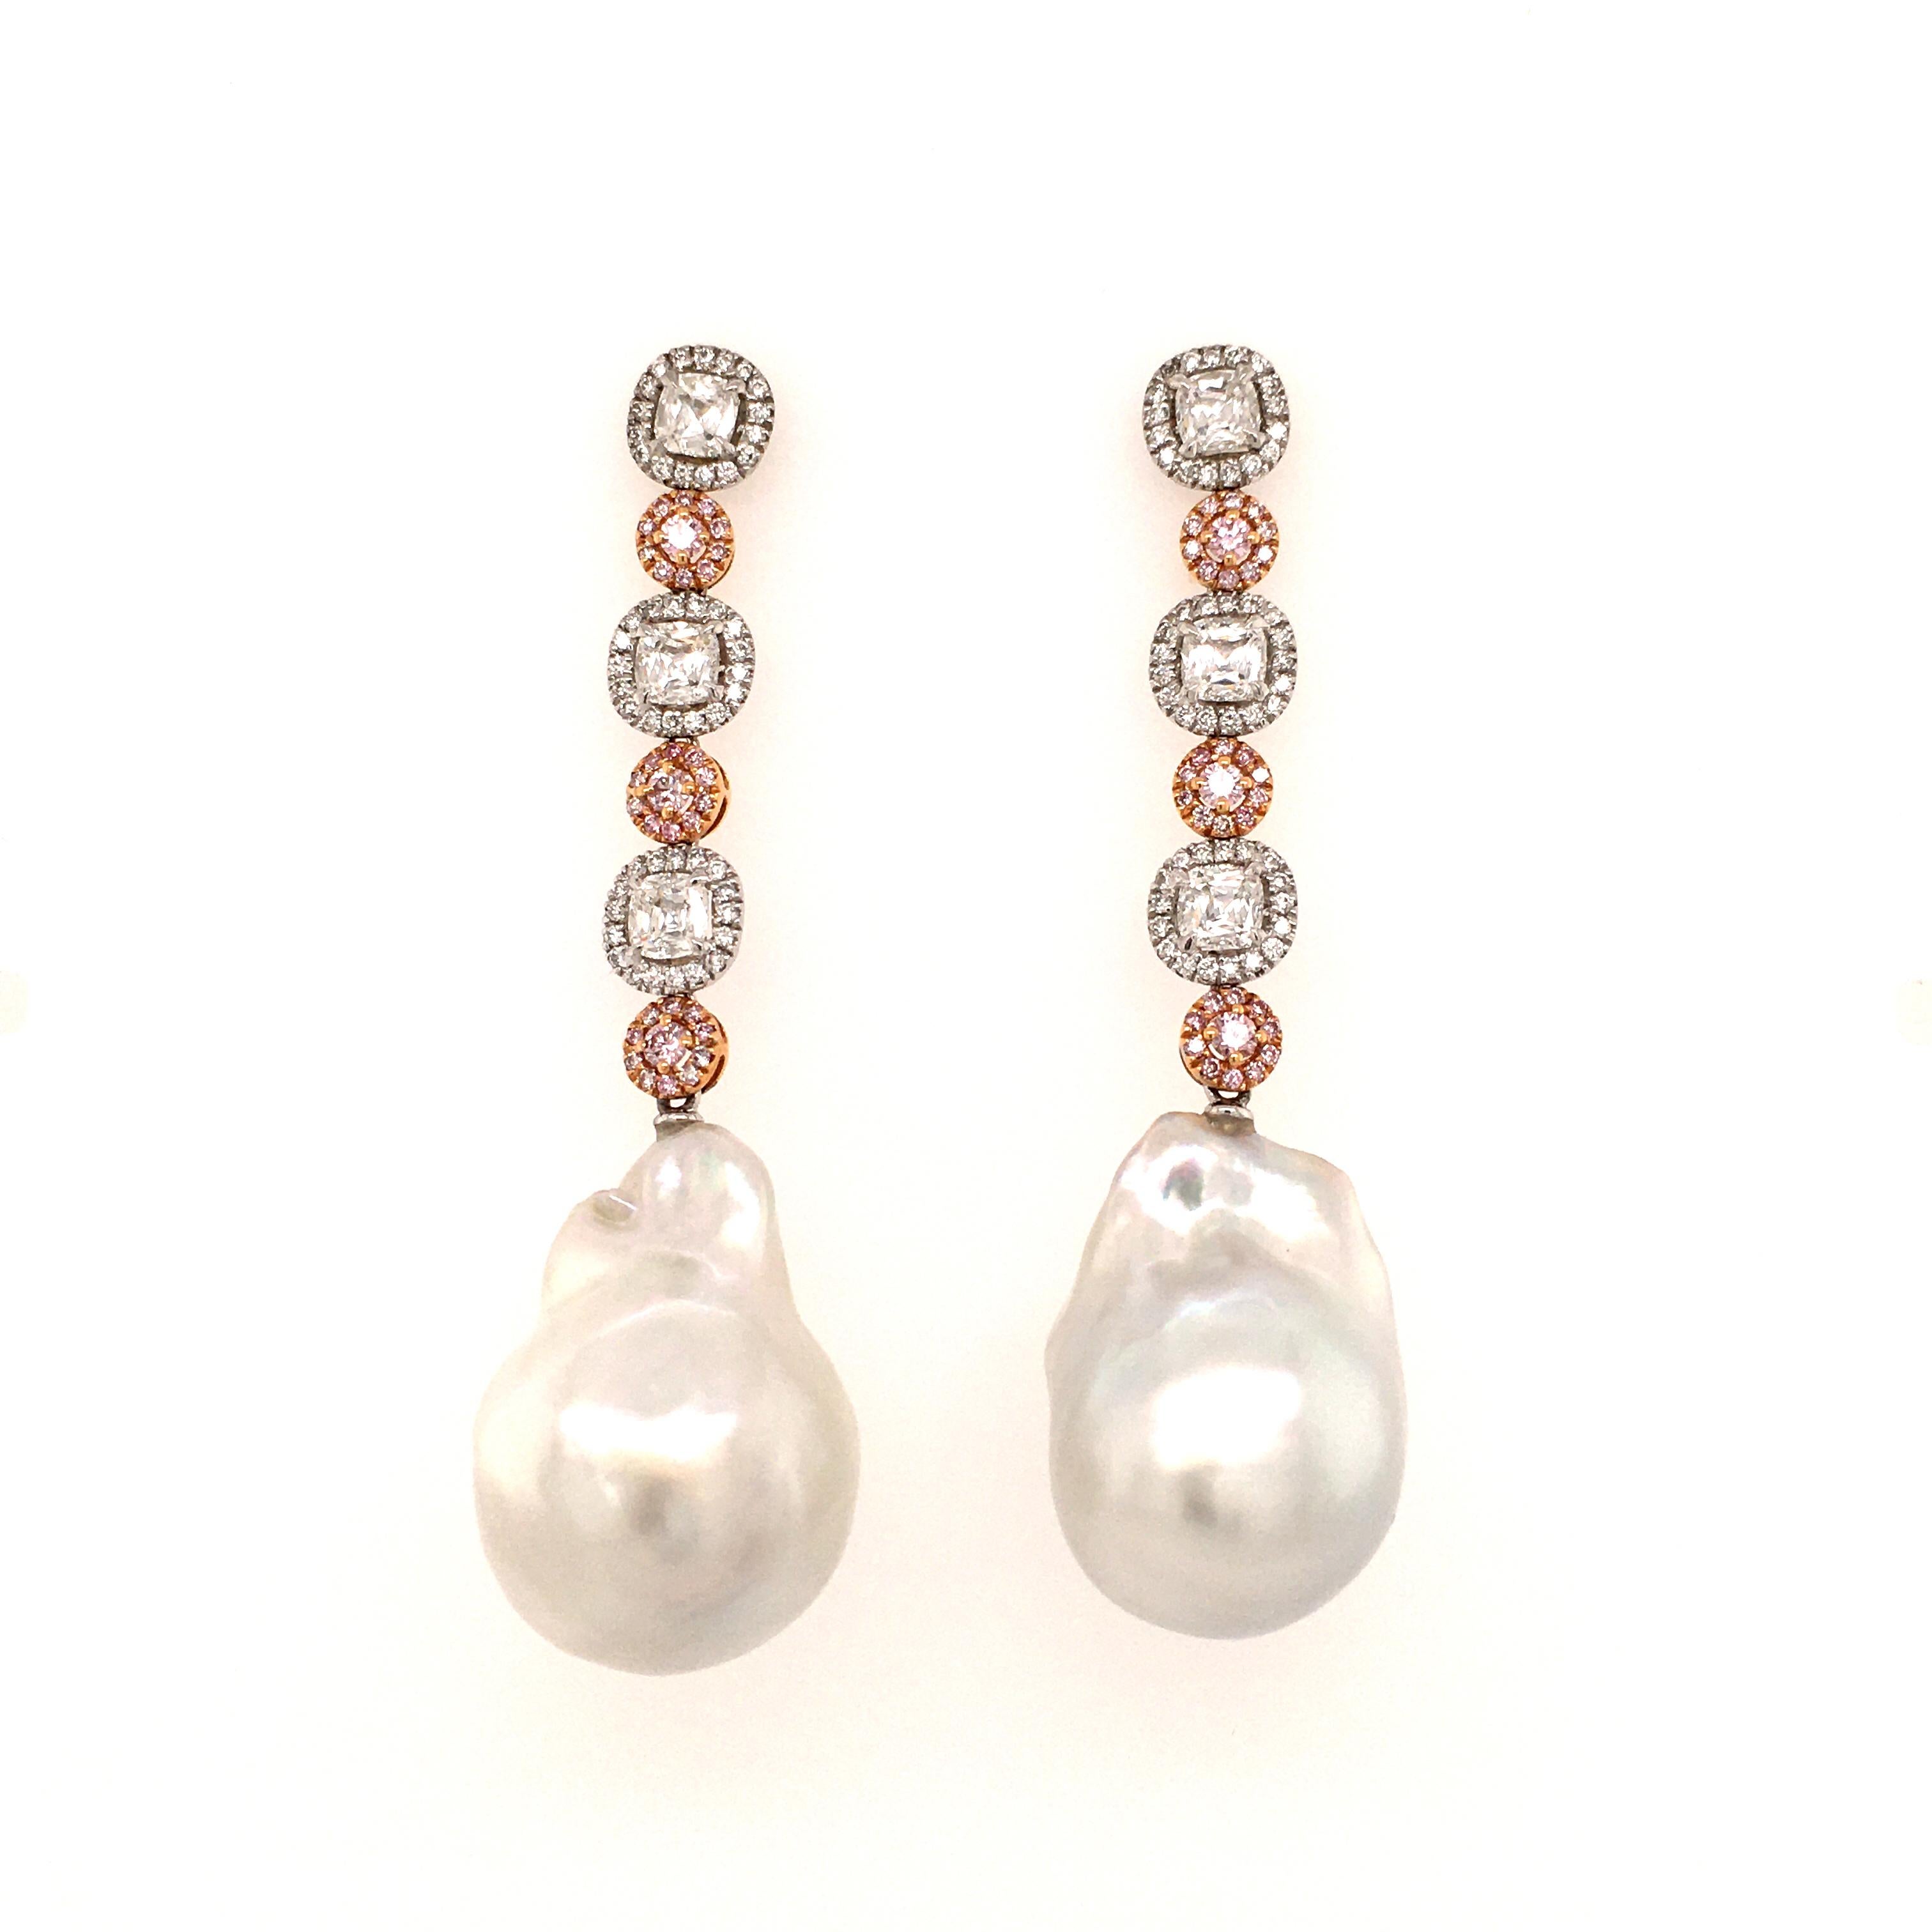 These beautifully crafted earstuds feature two unique baroque shaped South Sea cultured Pearls measuering approx 24.1 x 17.8 and 23.4 x 16.6 mm. Mounting in platinum 950 and rose gold 750, set with 6 cushion shaped diamonds and six brilliant shaped